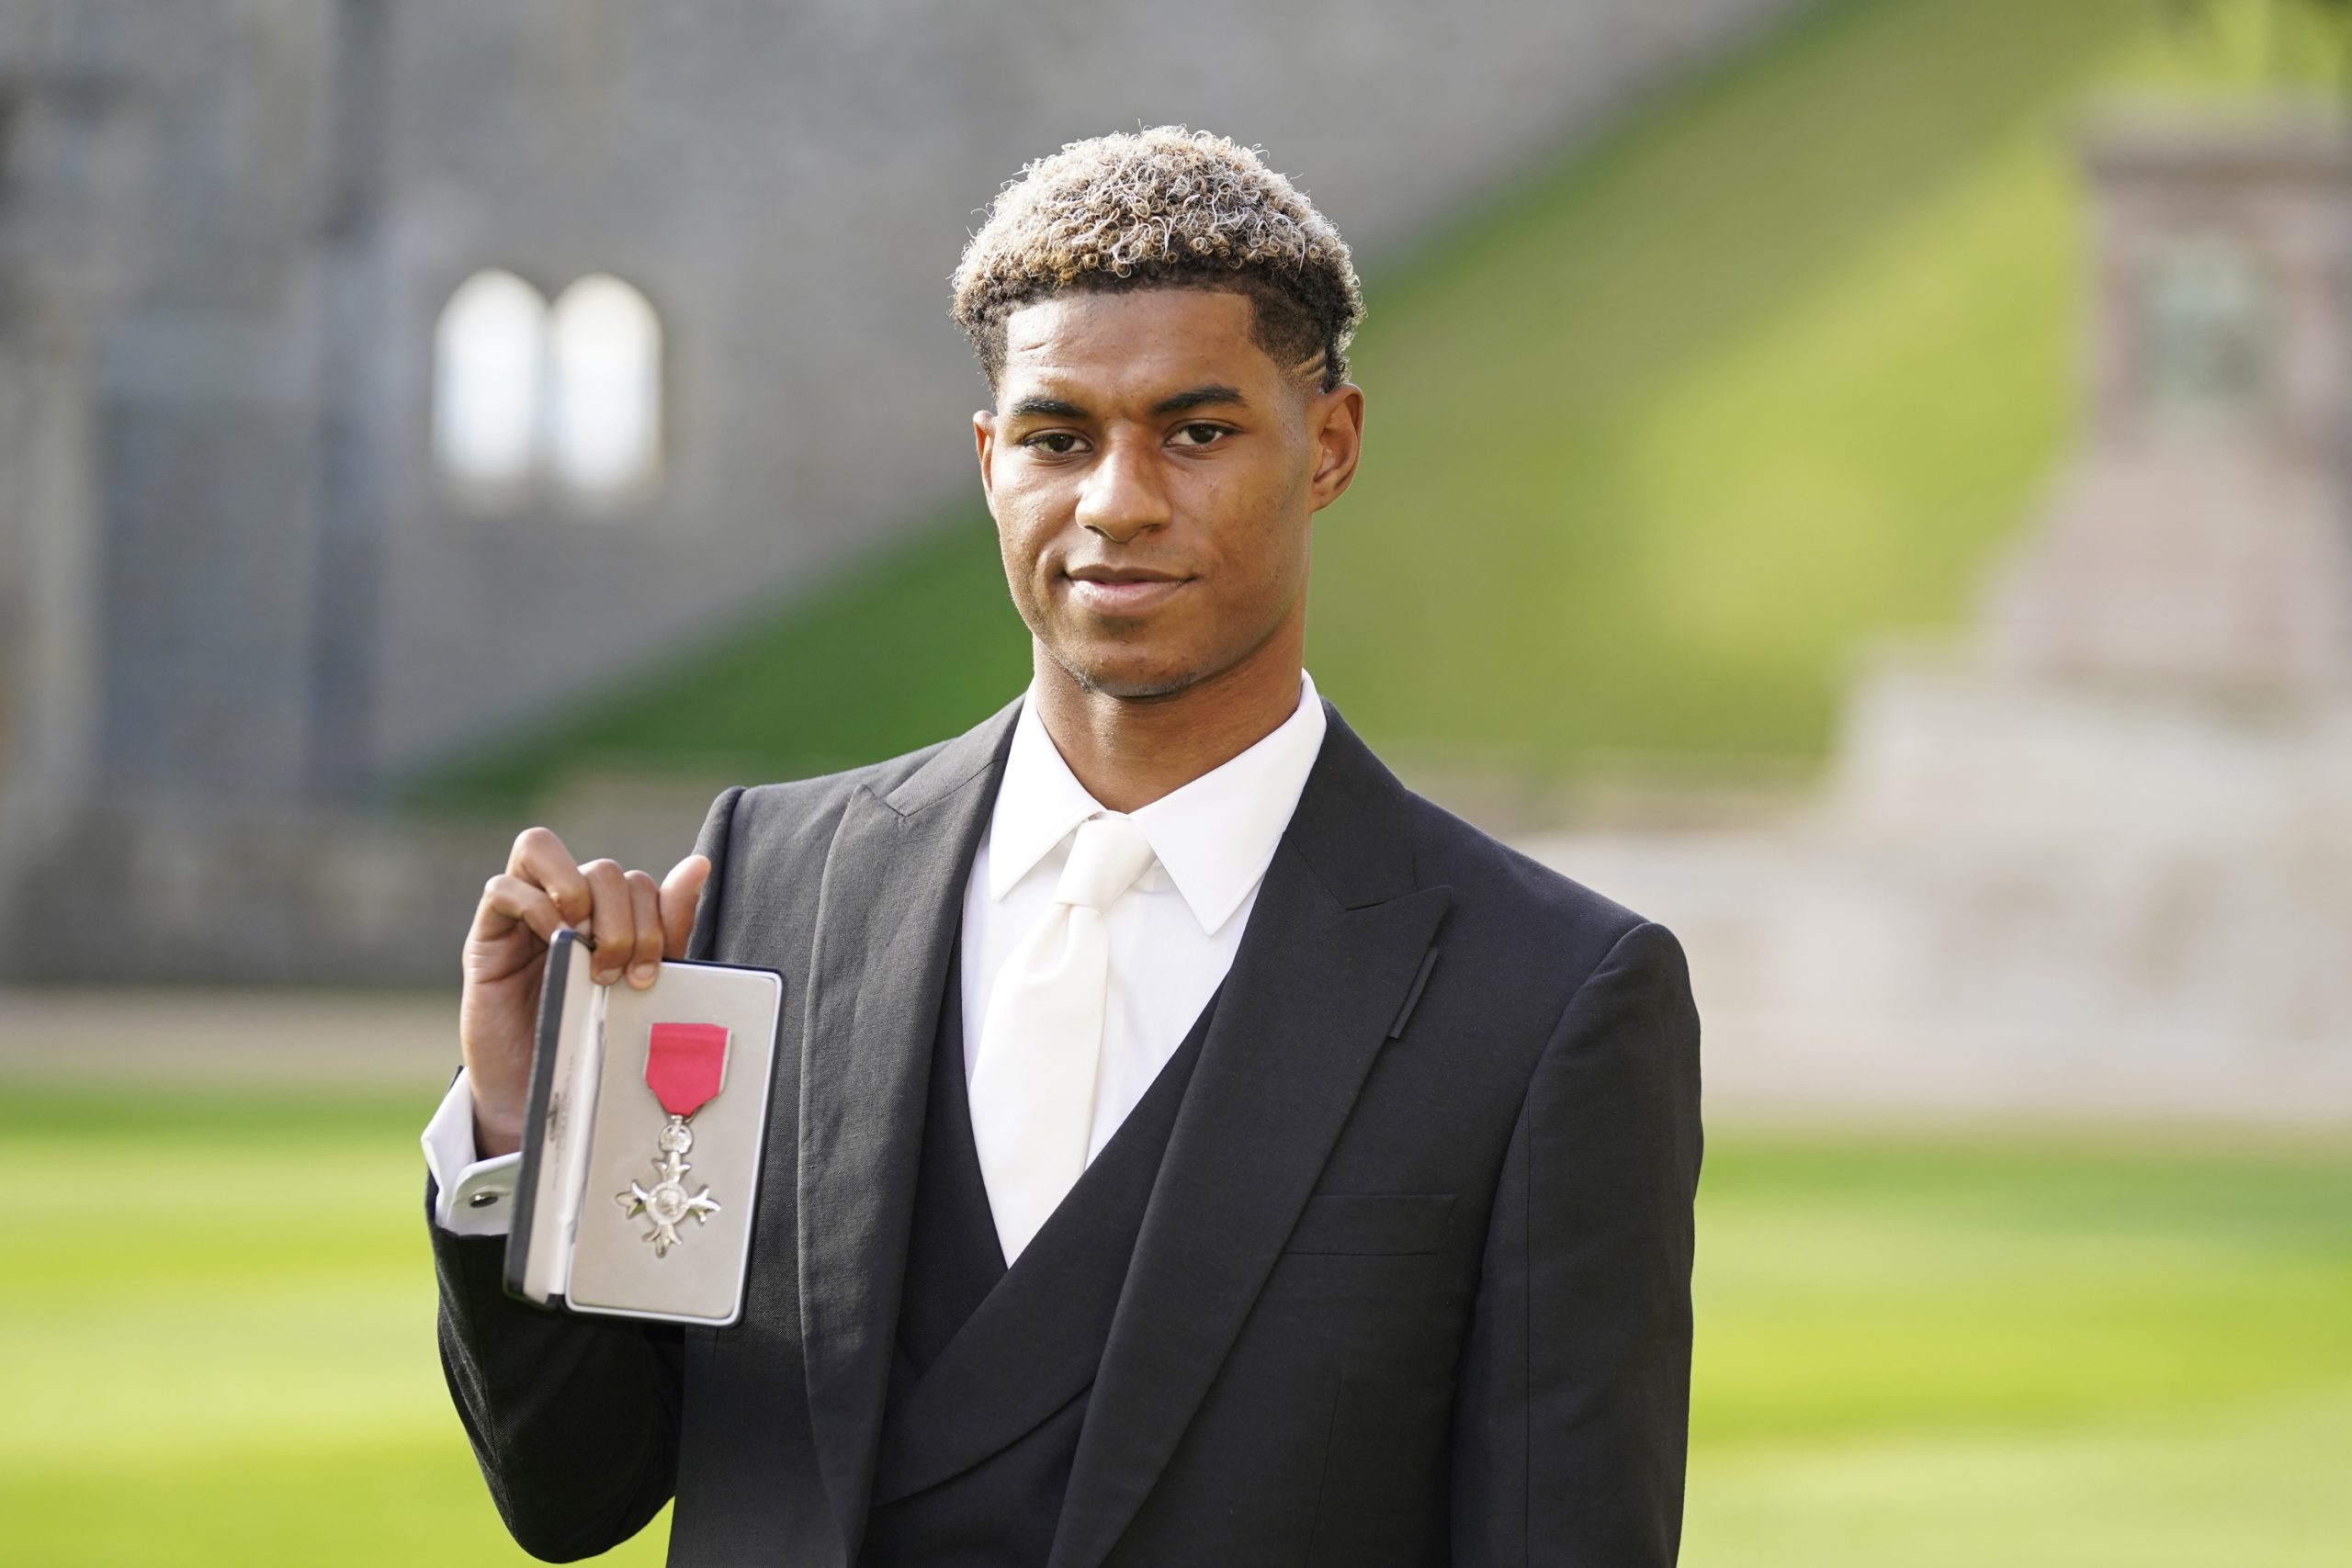 Marcus Rashford was honored with an MBE for his contributions to supporting vulnerable children in the UK during the Covid-19 pandemic.